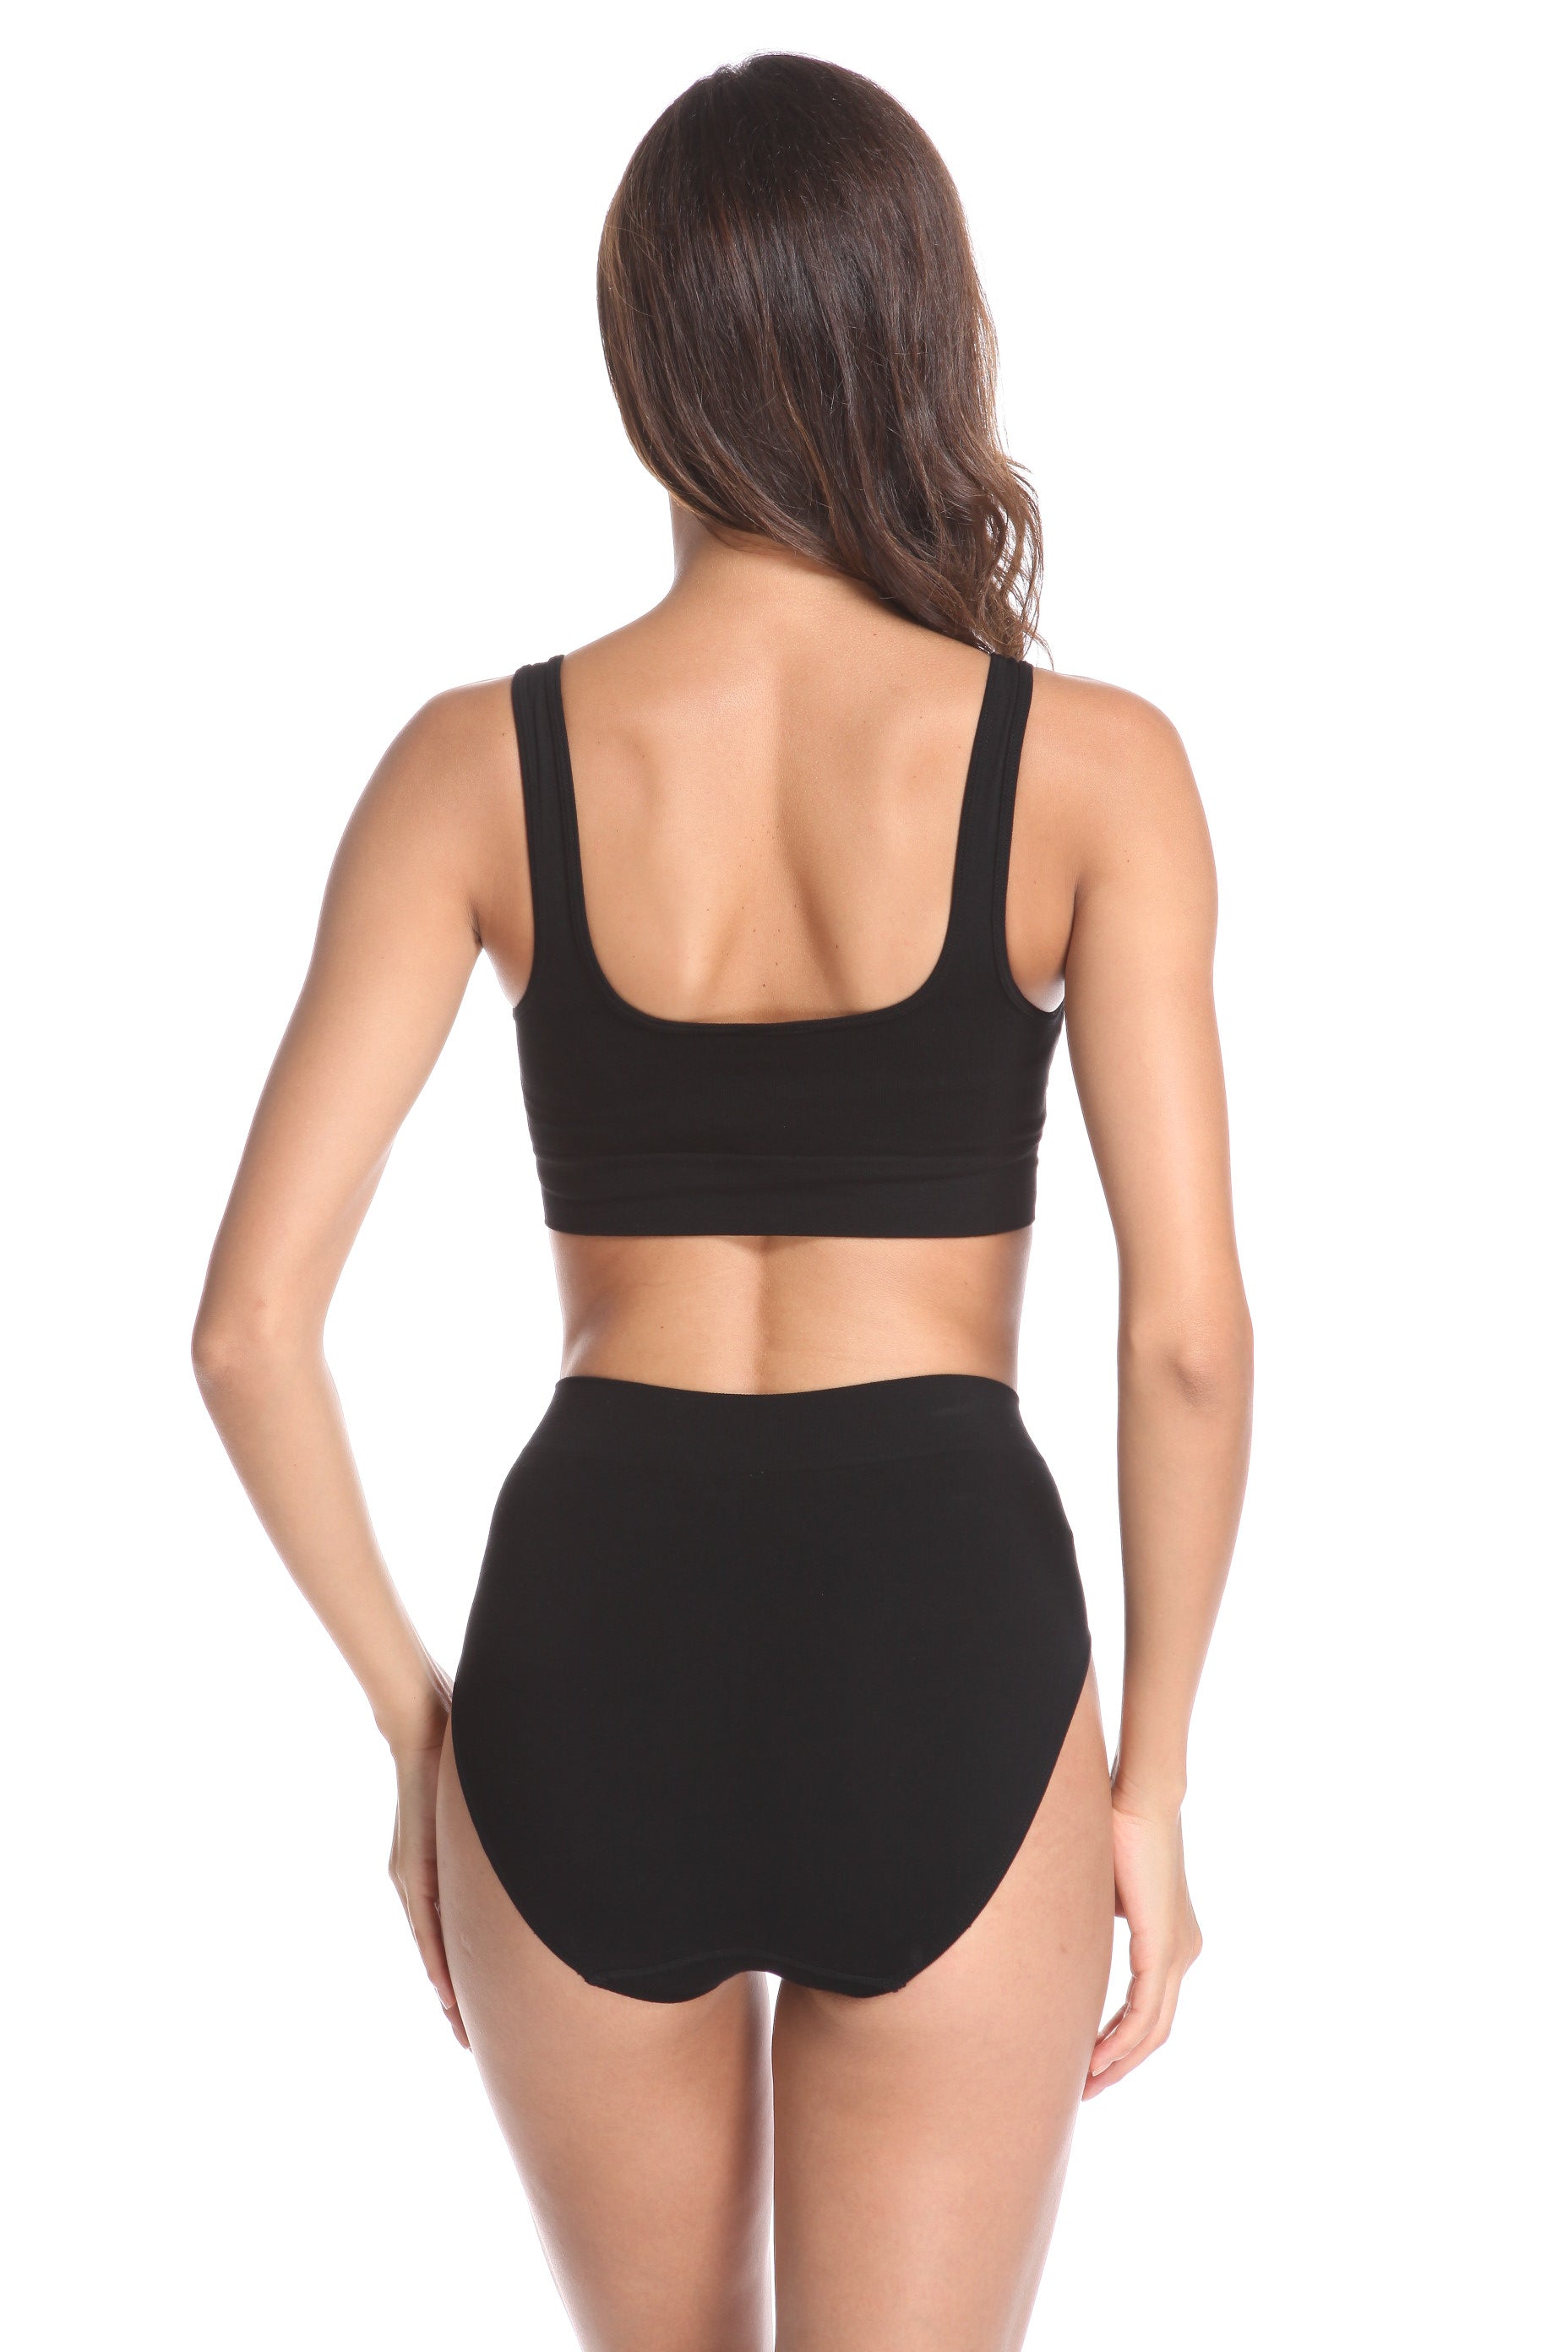 Bamboo Best Bum Knickers  Bodypeace Bamboo Clothing